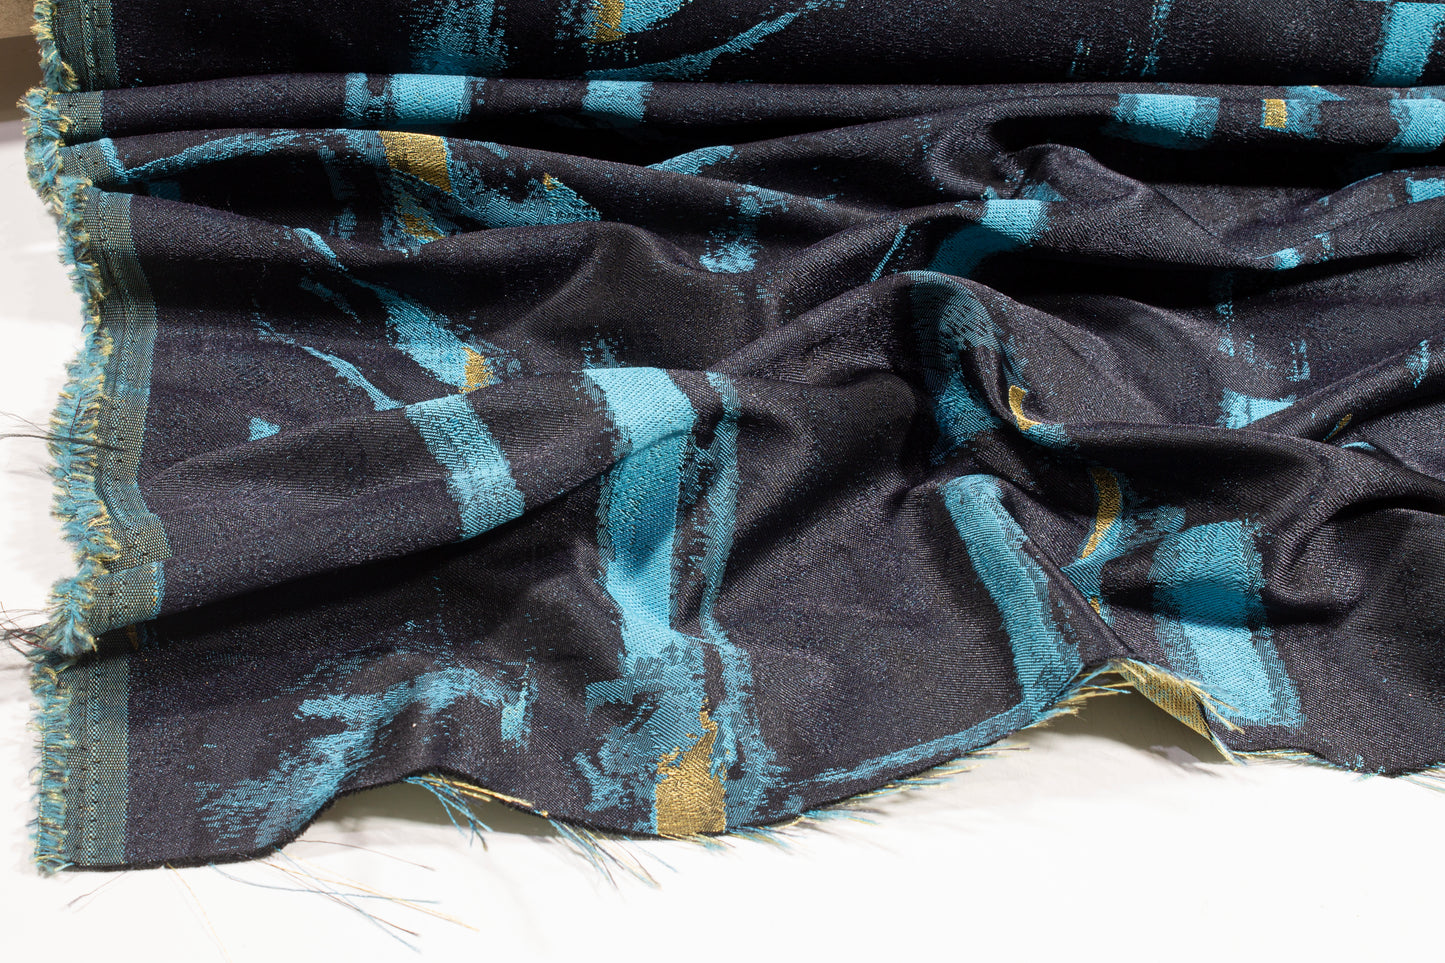 Abstract Metallic Brocade - Blue and Gold